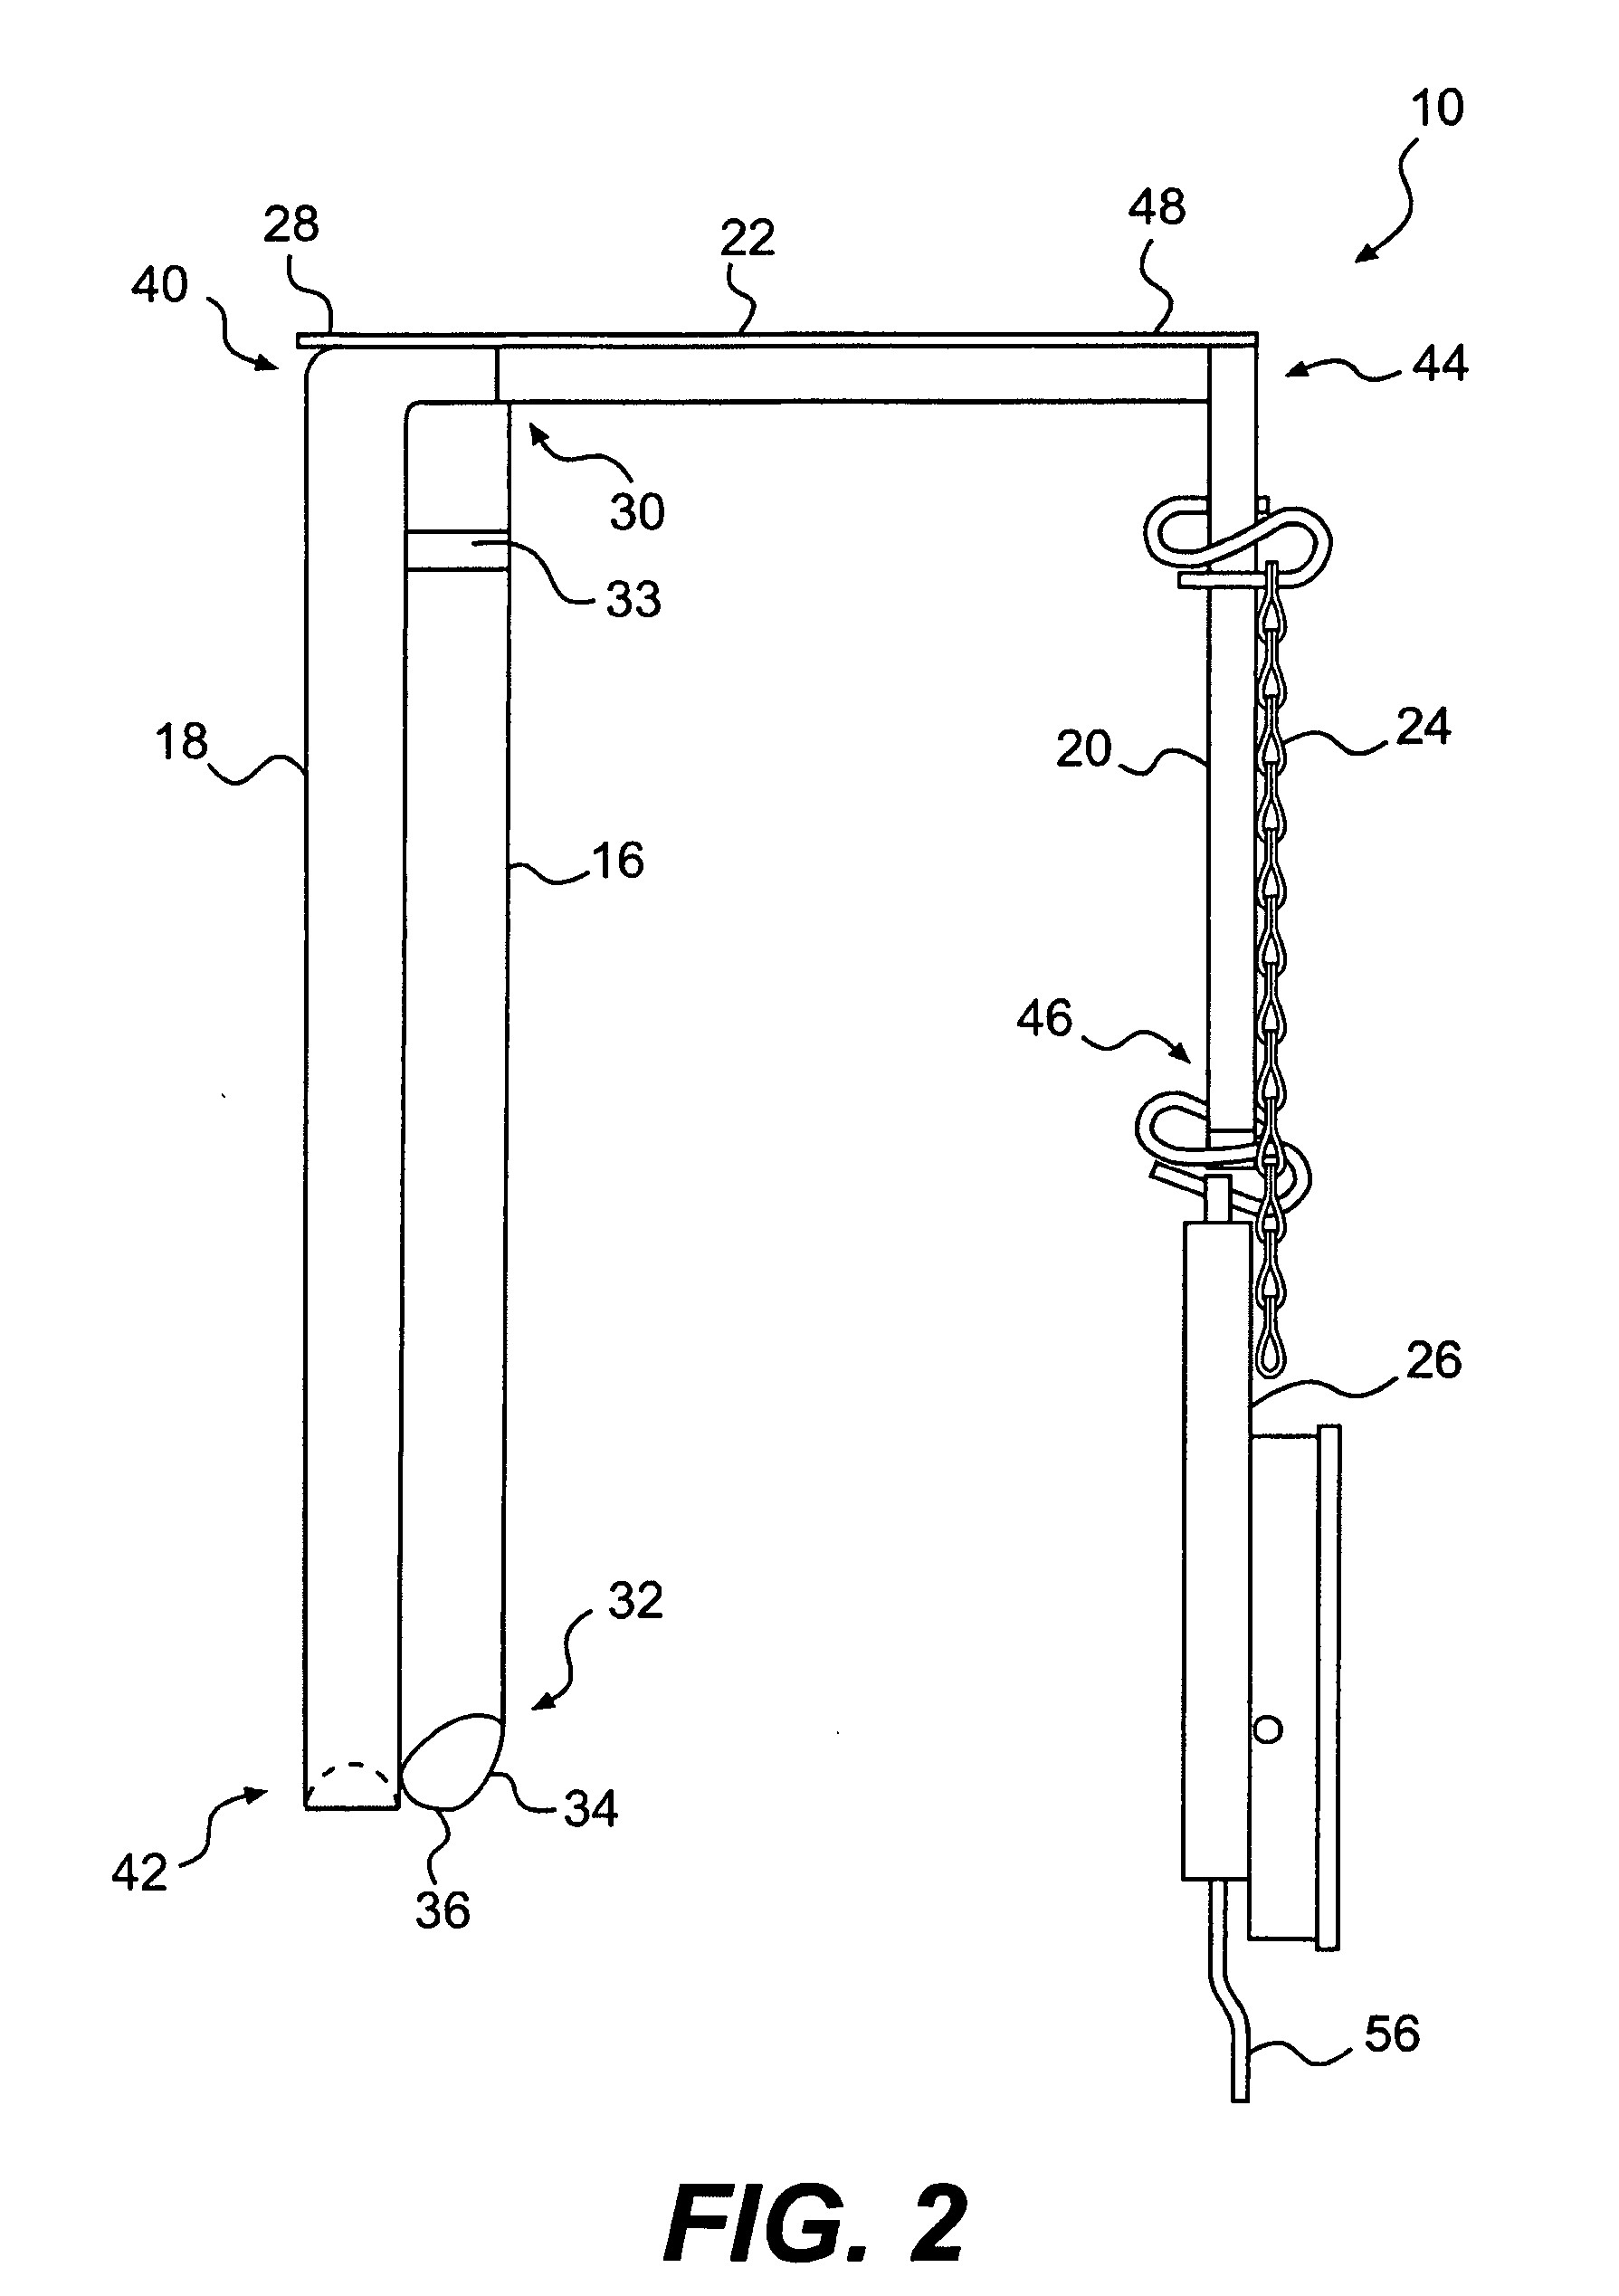 Apparatus and method for measuring containment force in a wrapped load and a control process for establishing and maintaining a predetermined containment force profile